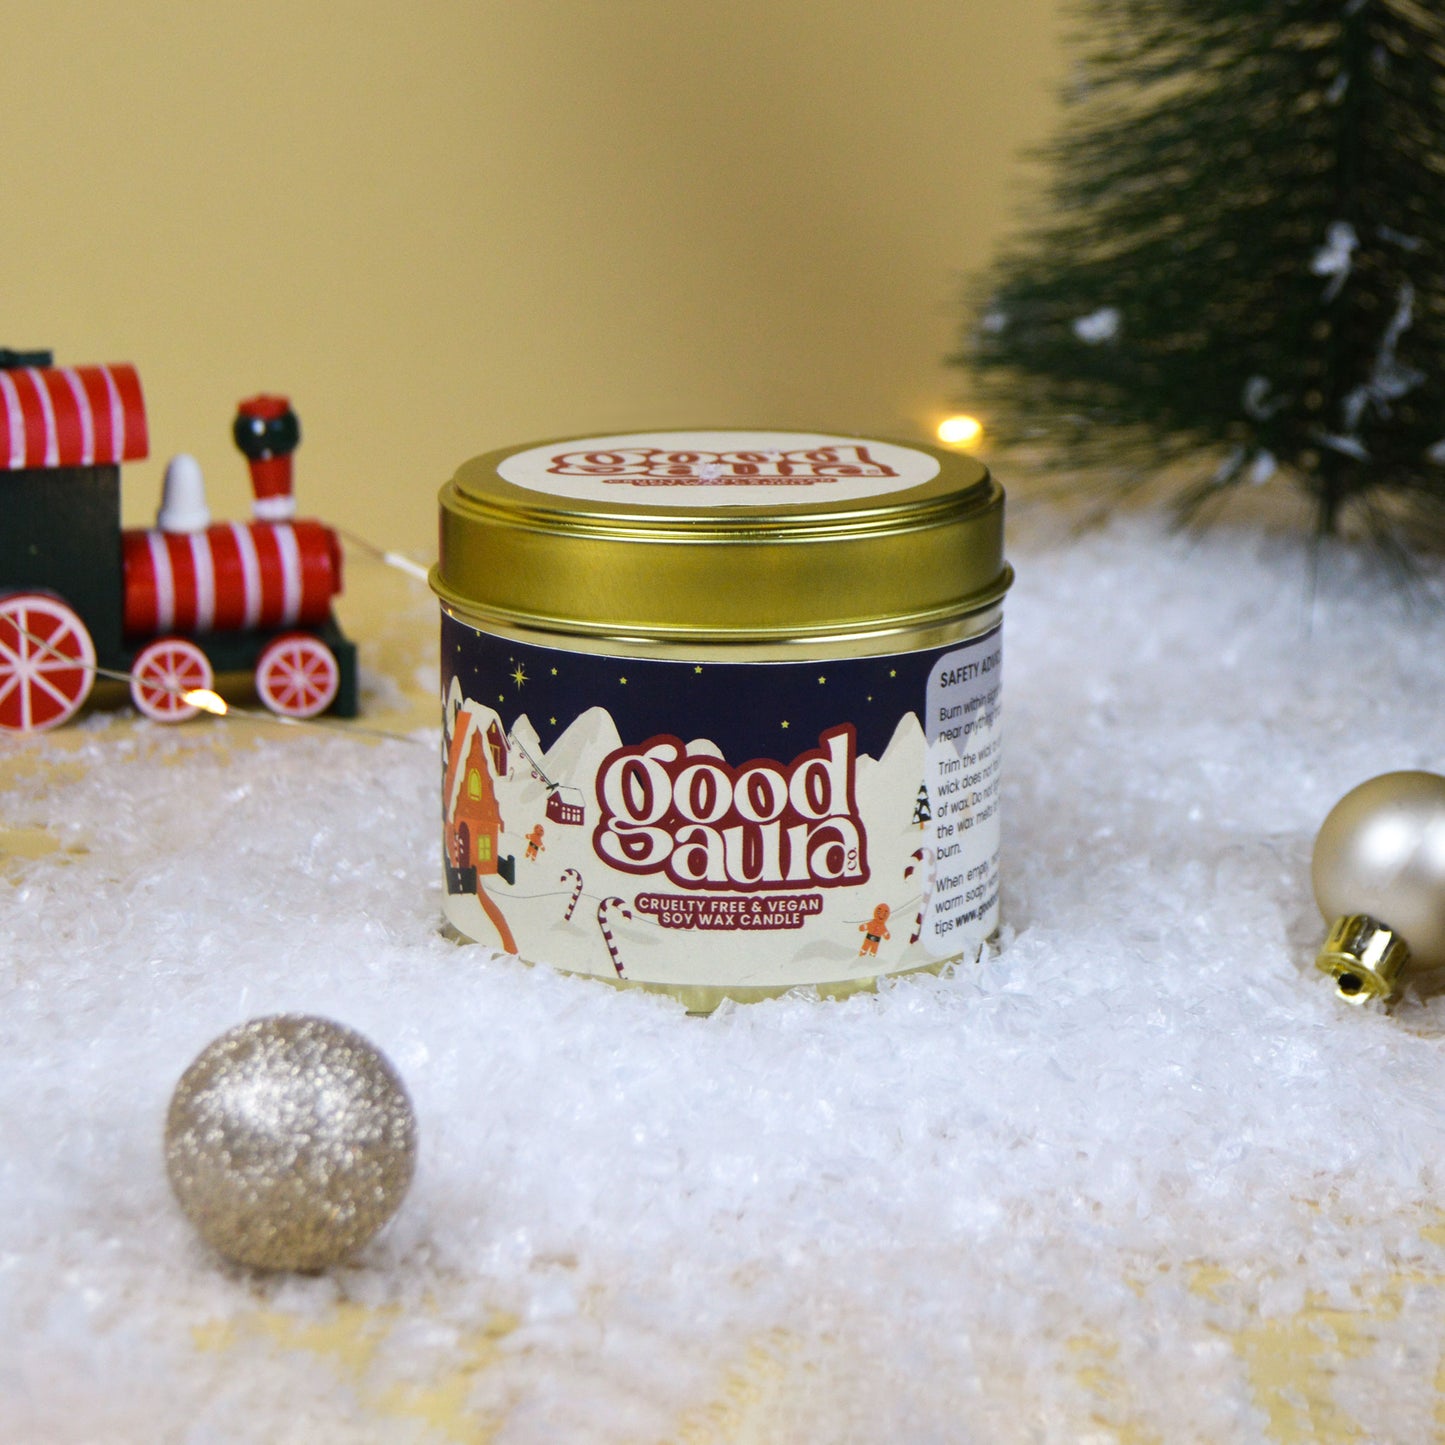 Gingerbread Cookies Limited Edition Scent | Standard Brass Gold Candle | Stocking Filler